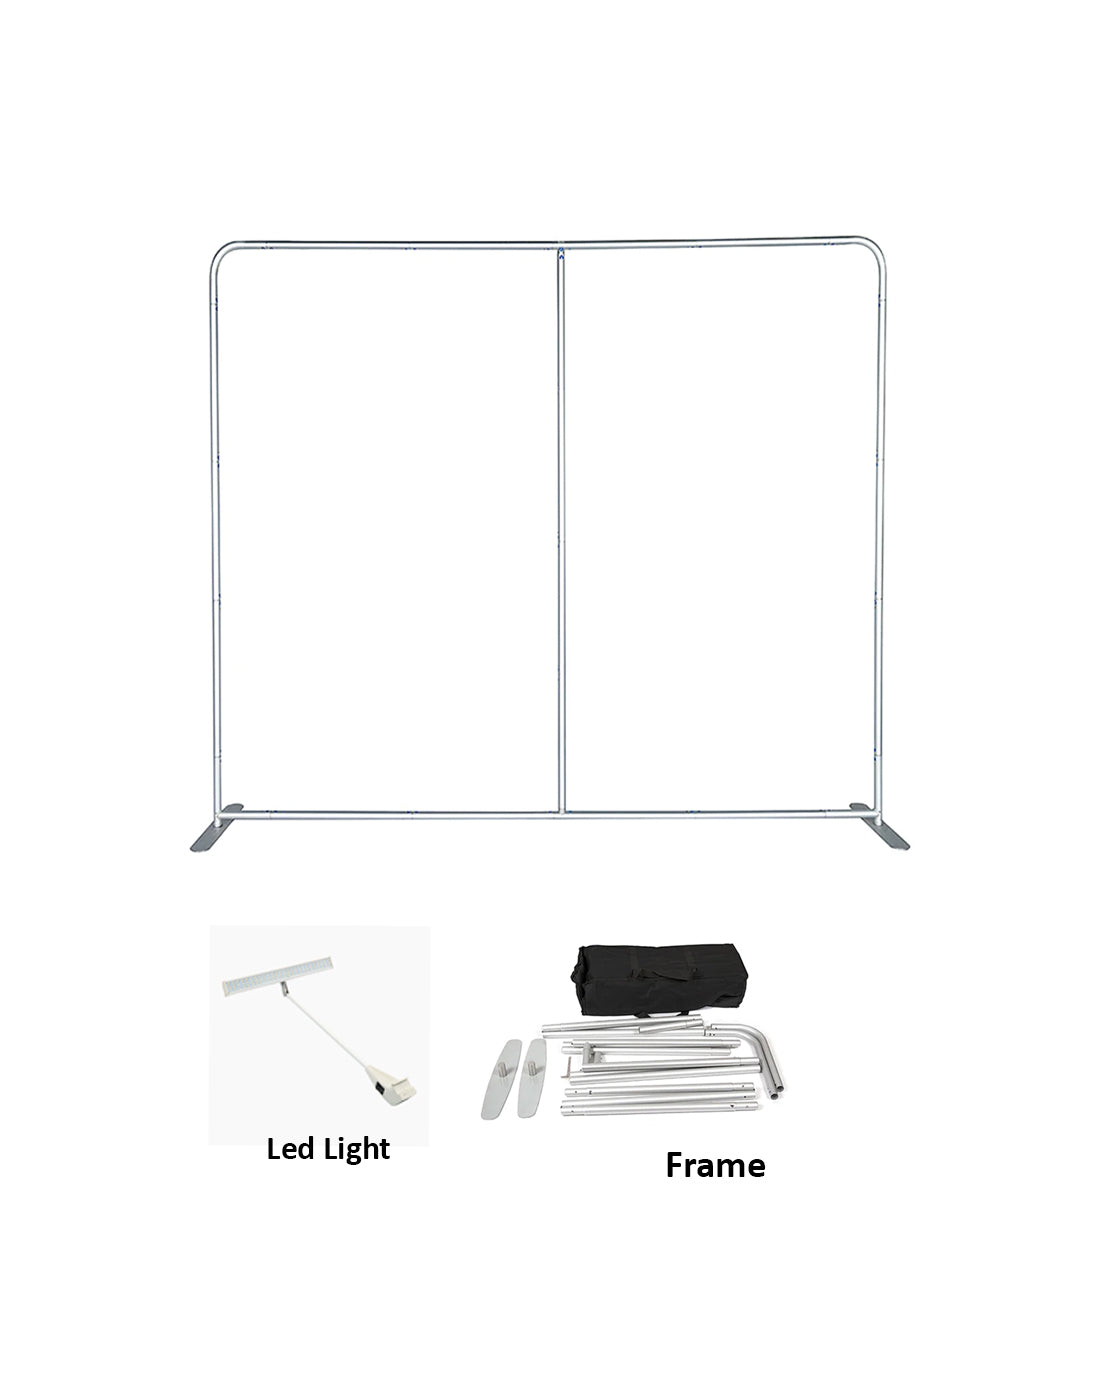 Straight Tension Media Wall with LED -2.4m x 2.3m